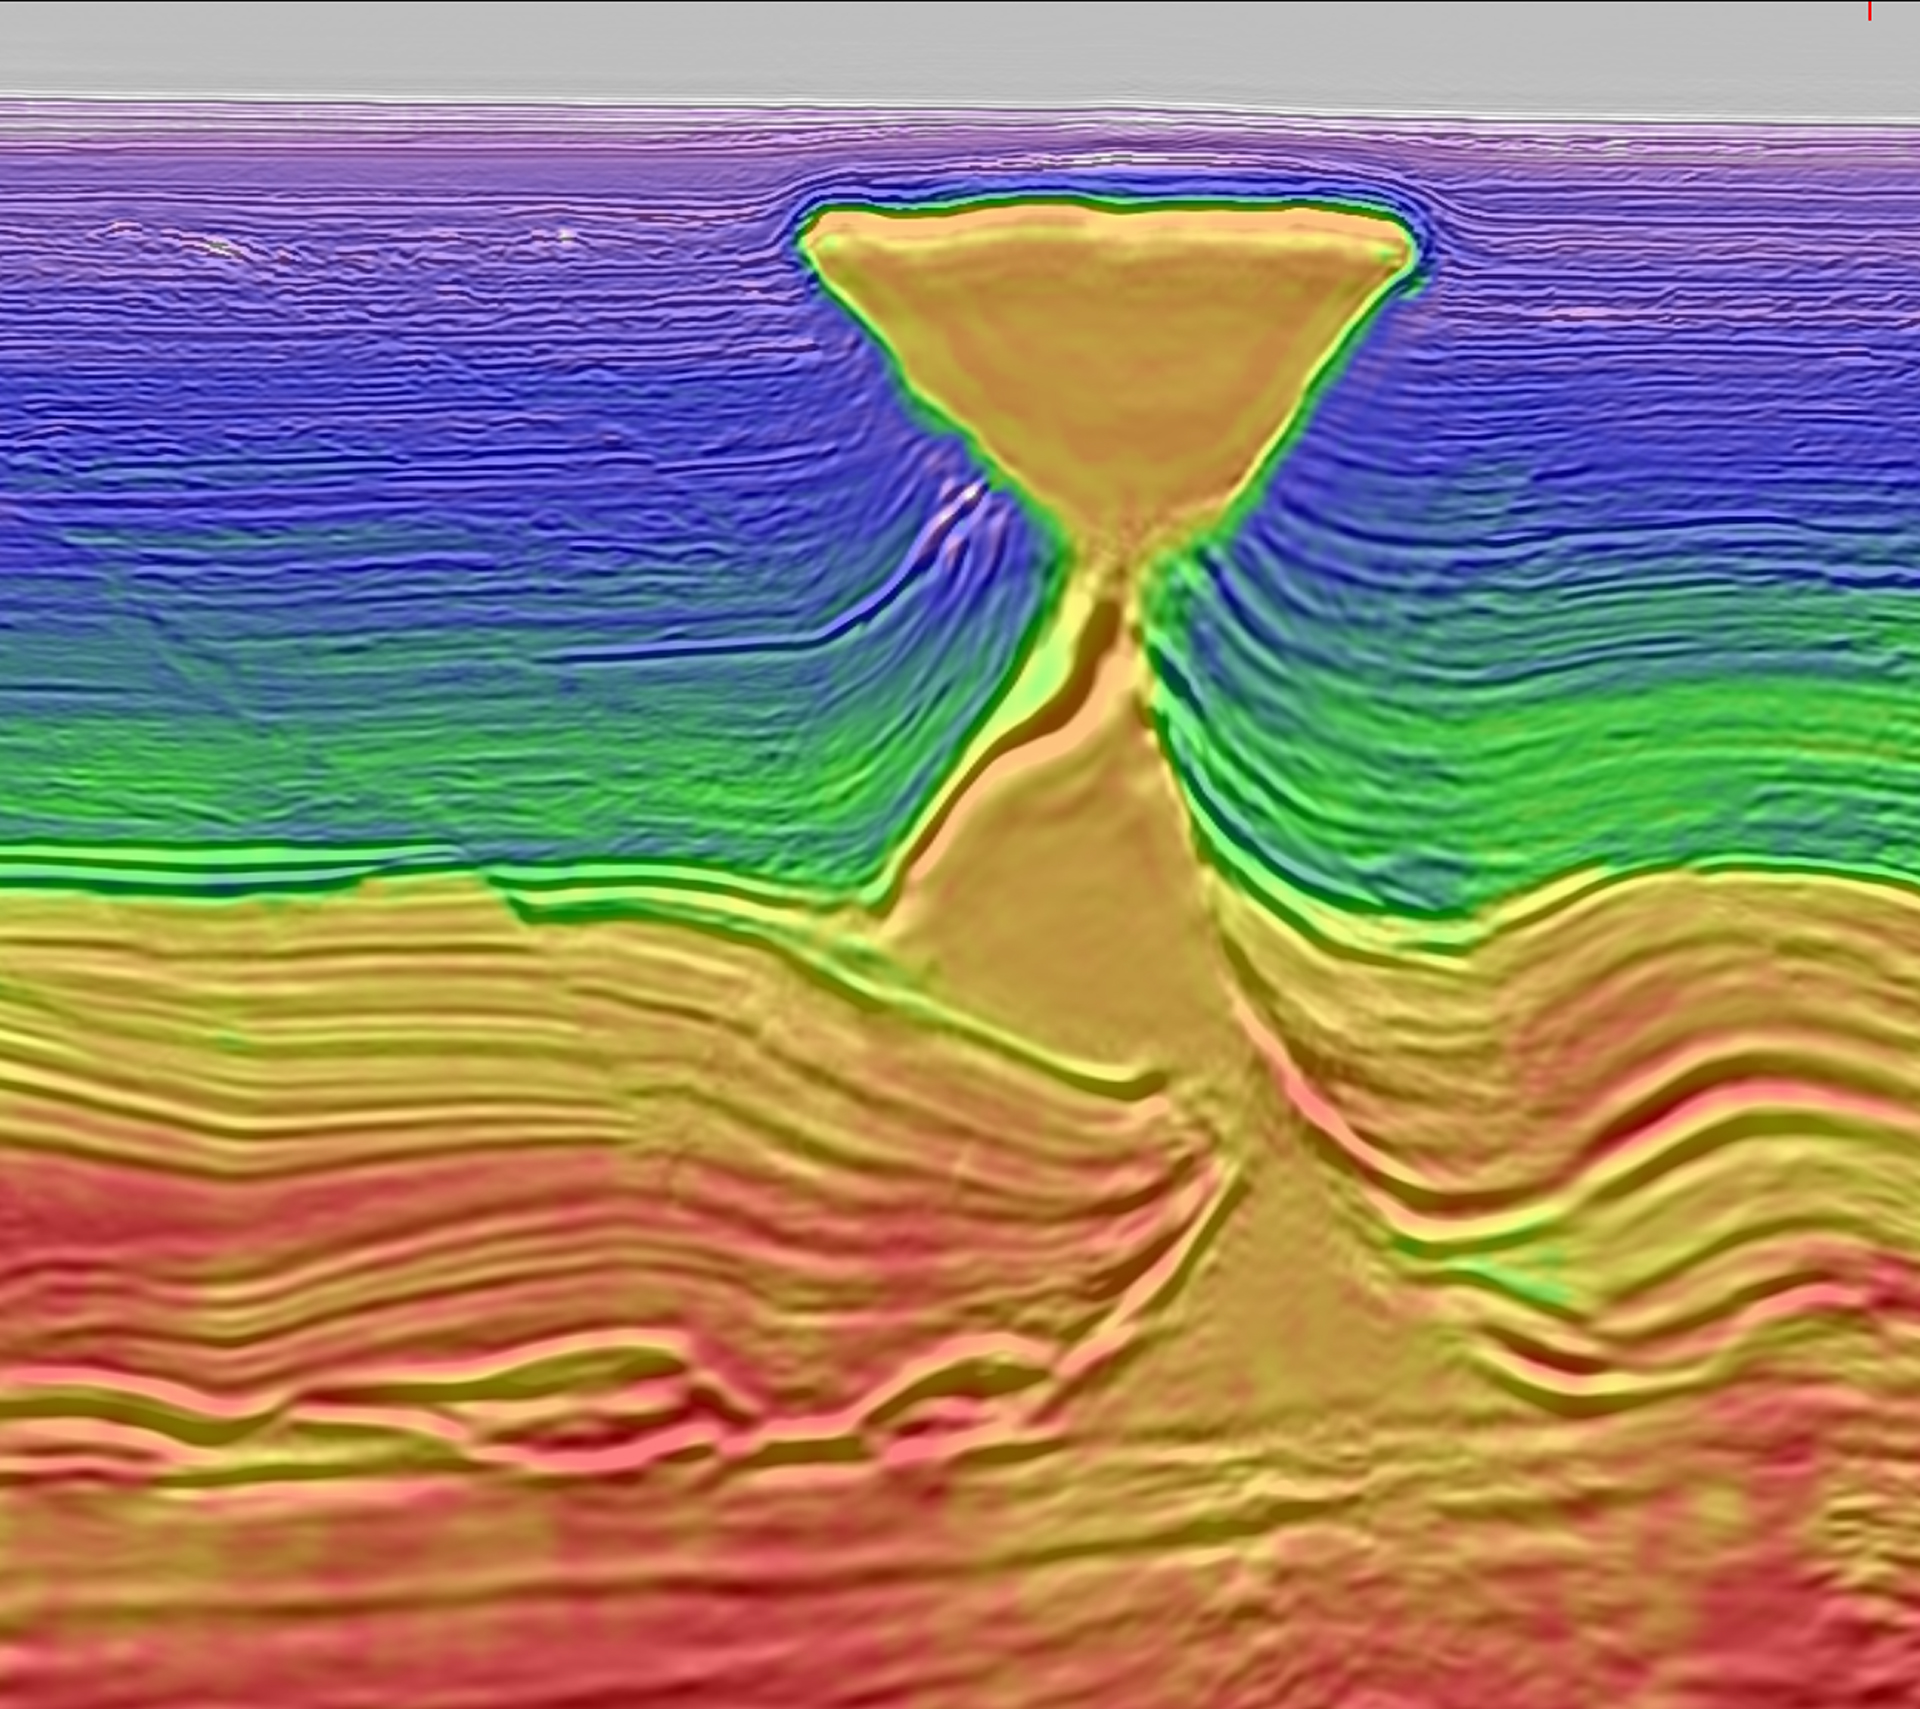 Subsurface imaging OBN data – Mississippi Canyon, Gulf of Mexico